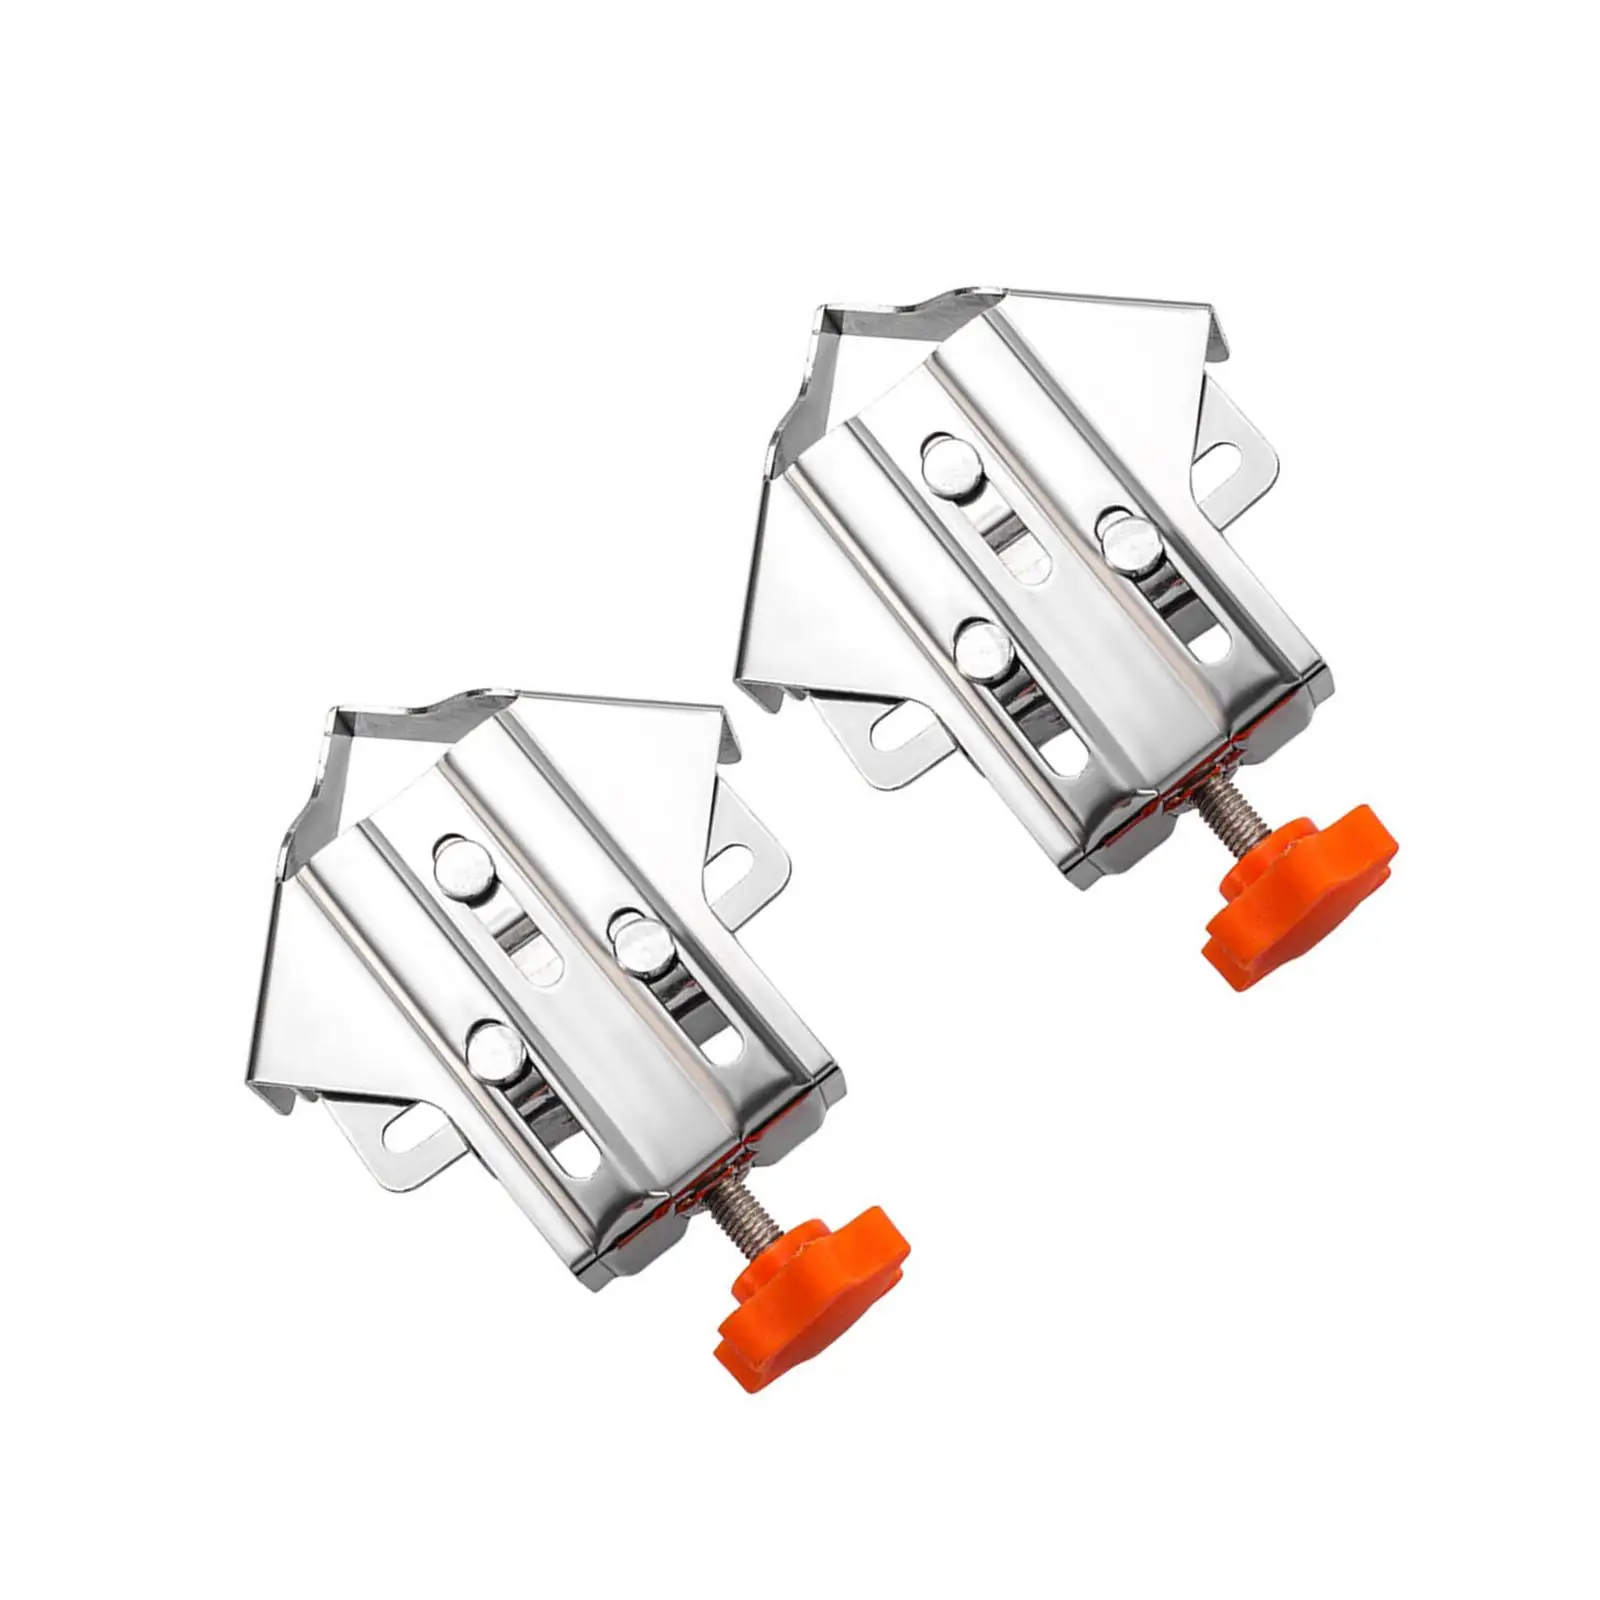 2Pcs Stainless Steel 90° Right Angle Clamp Woodworking Accessory for Furniture Repair Connection Wear Resistant Versatile